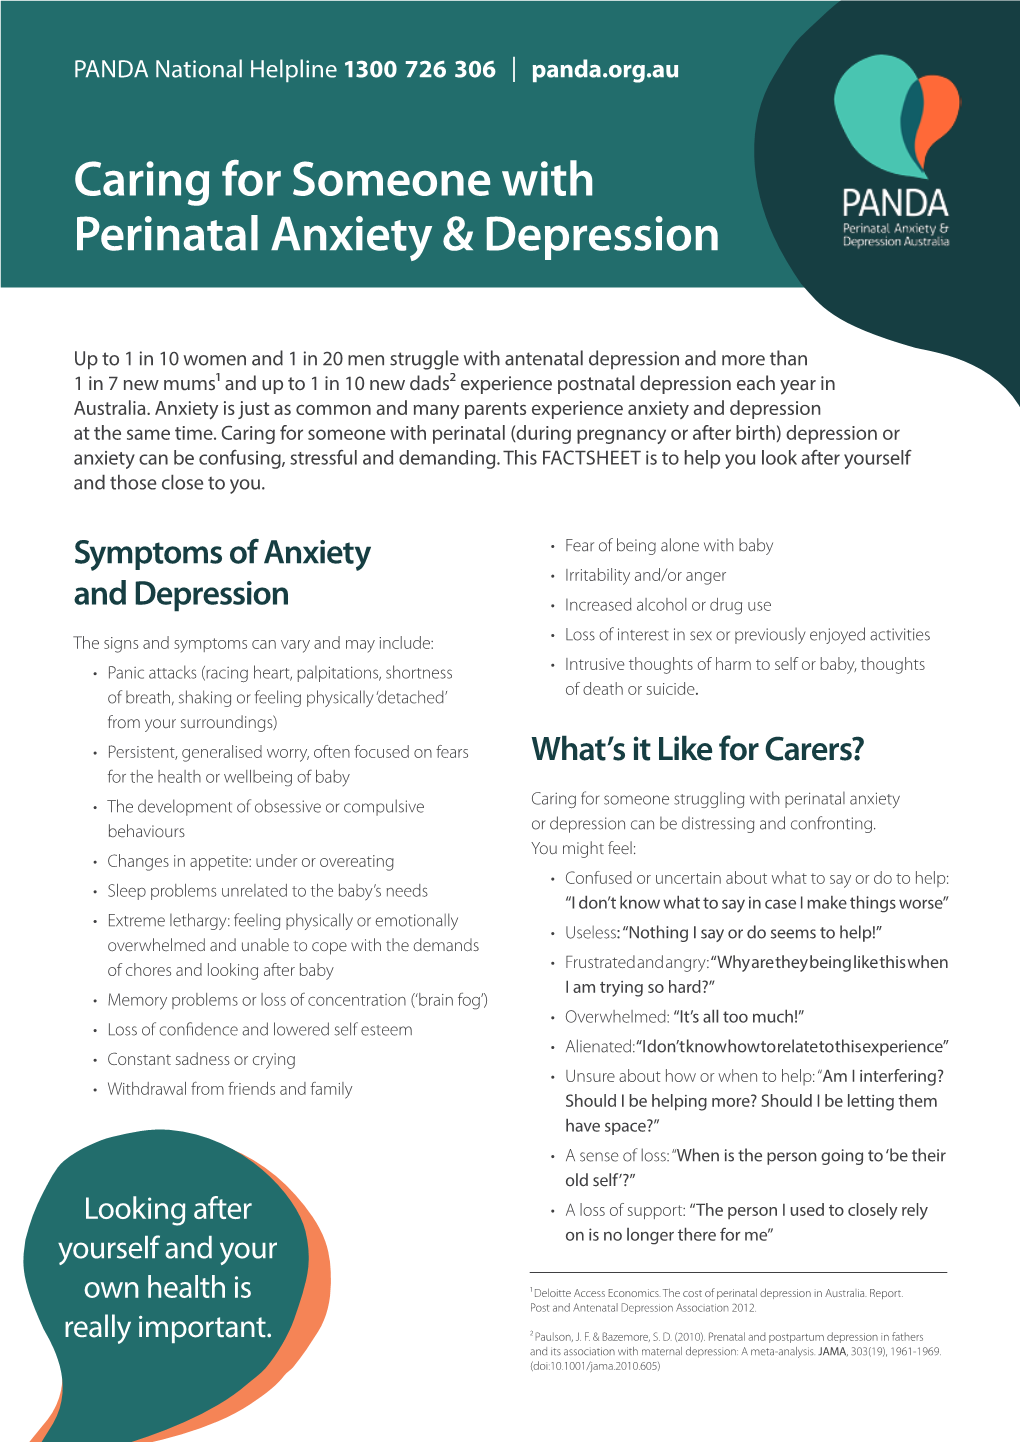 Caring for Someone with Perinatal Anxiety & Depression